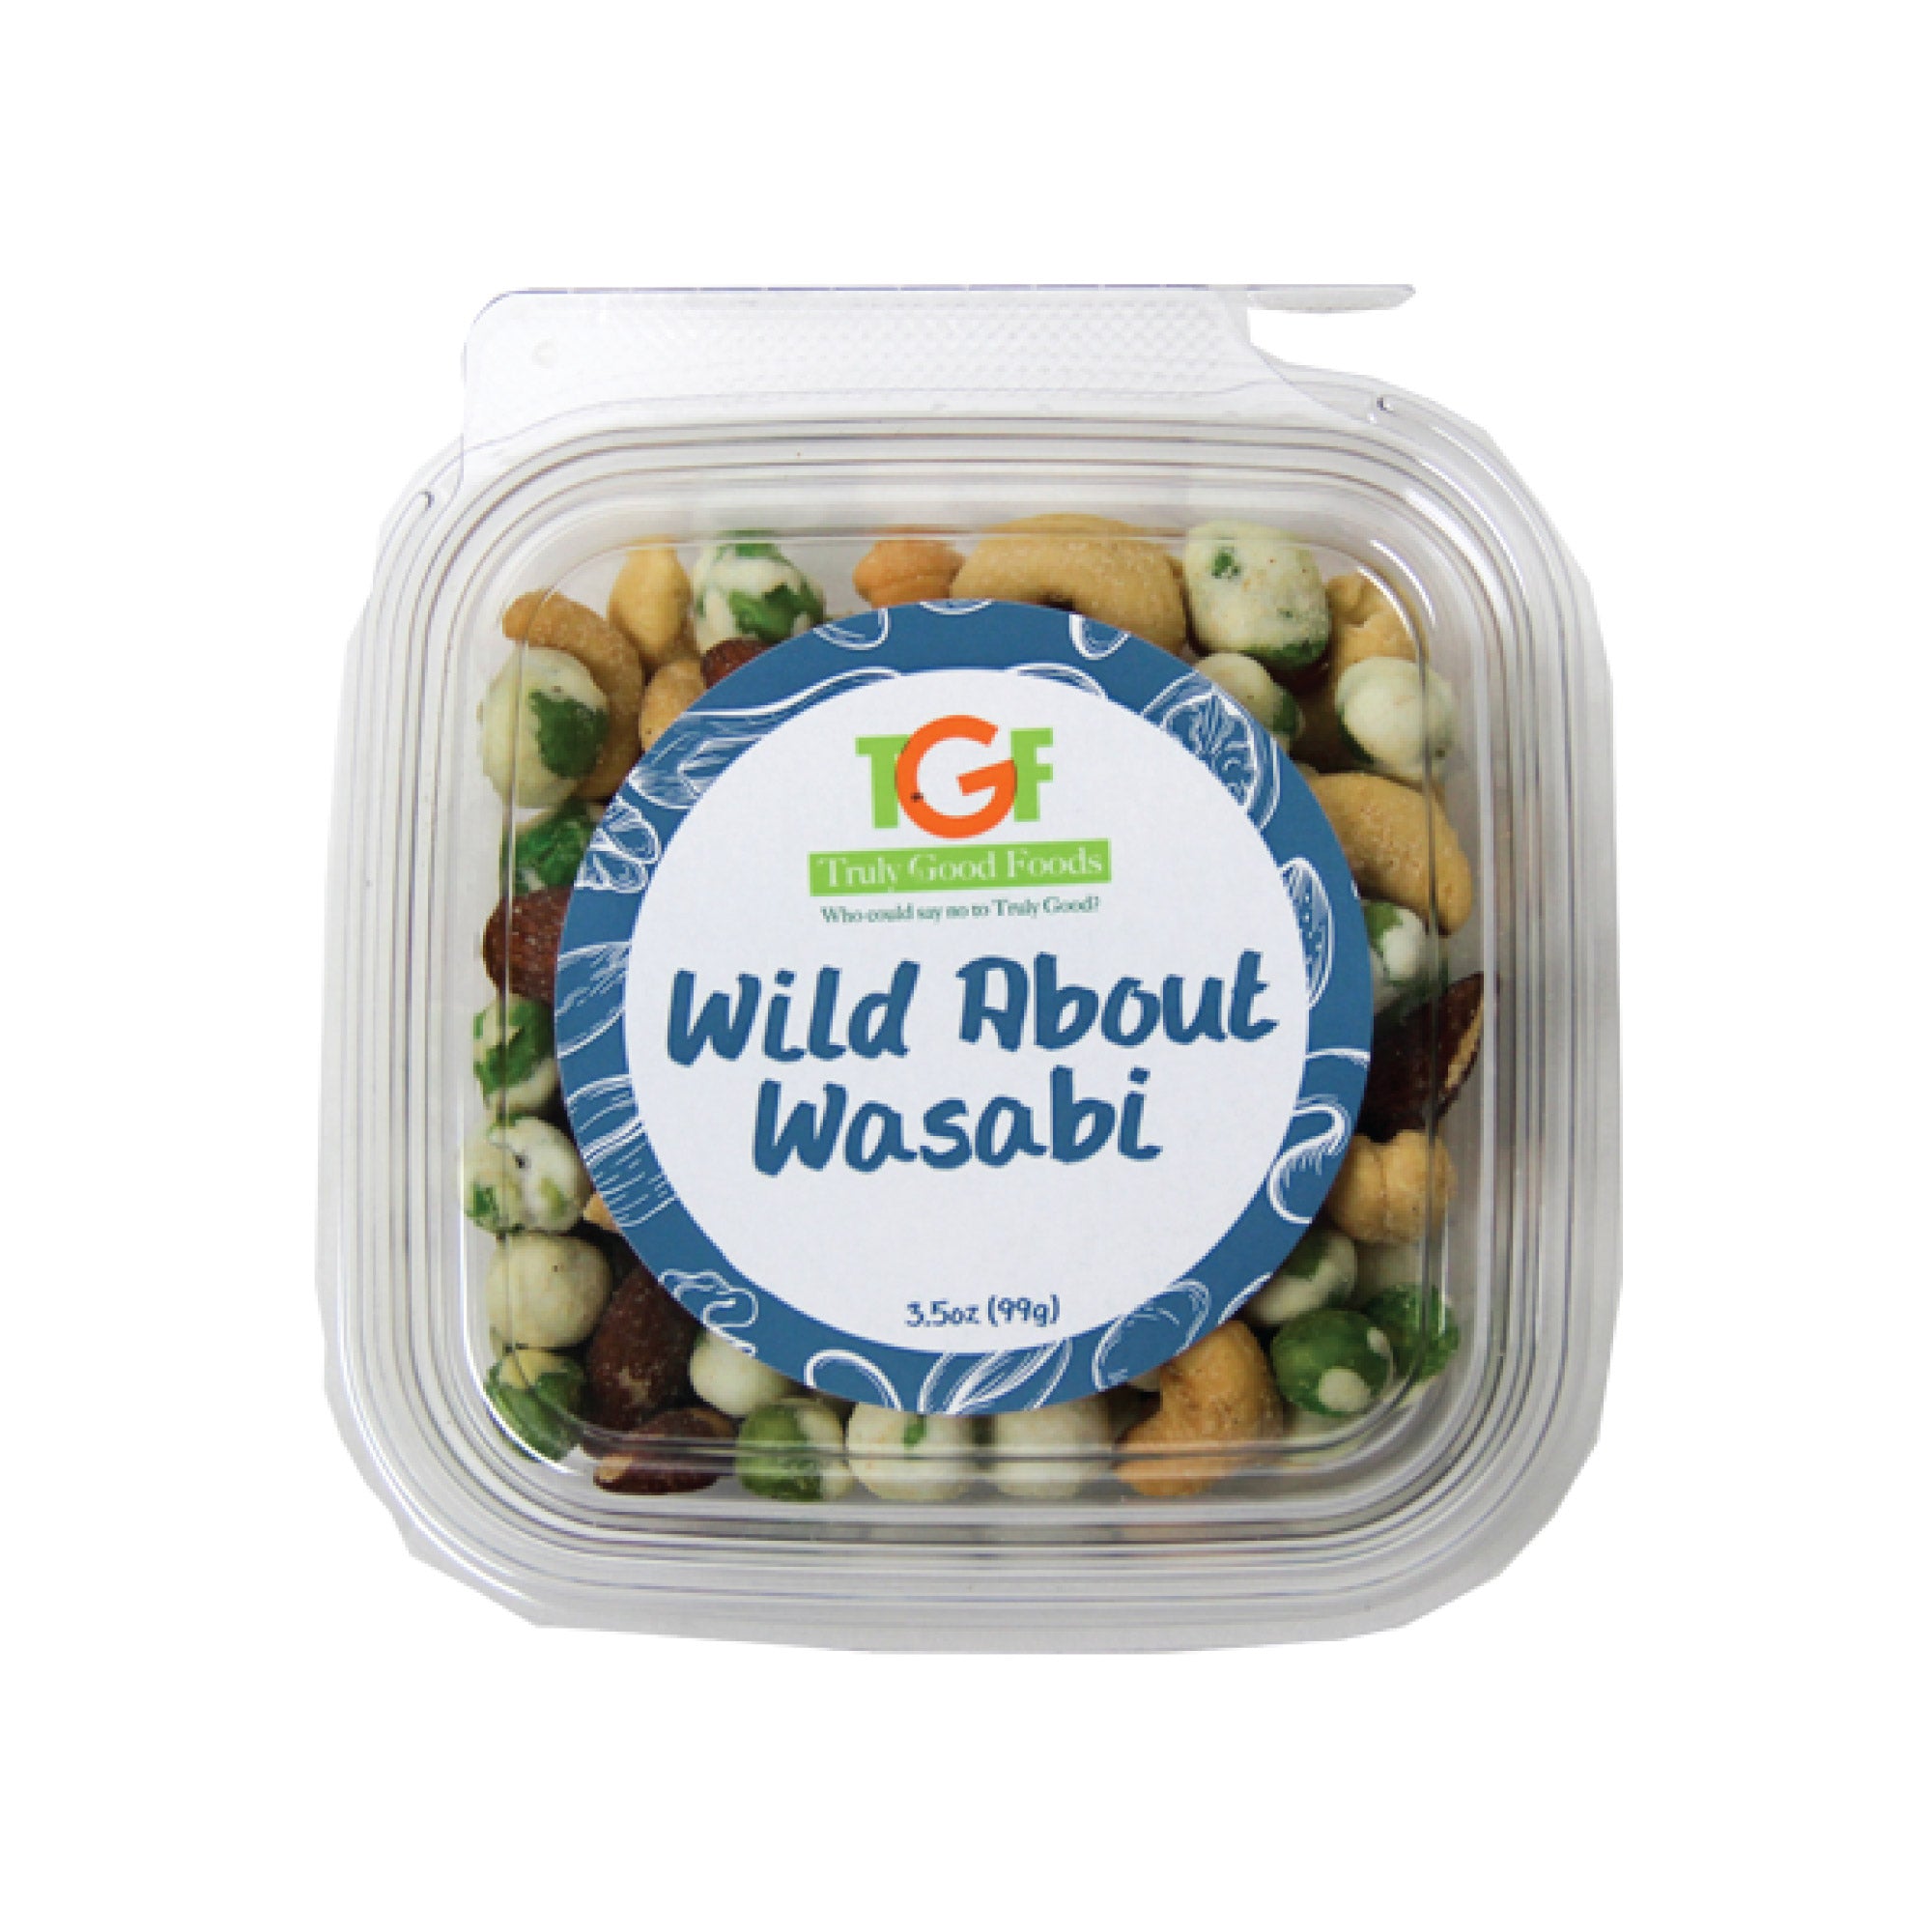 Wild About Wasabi Mini Cubes- 4 pack, 3.5oz – Truly Good Foods